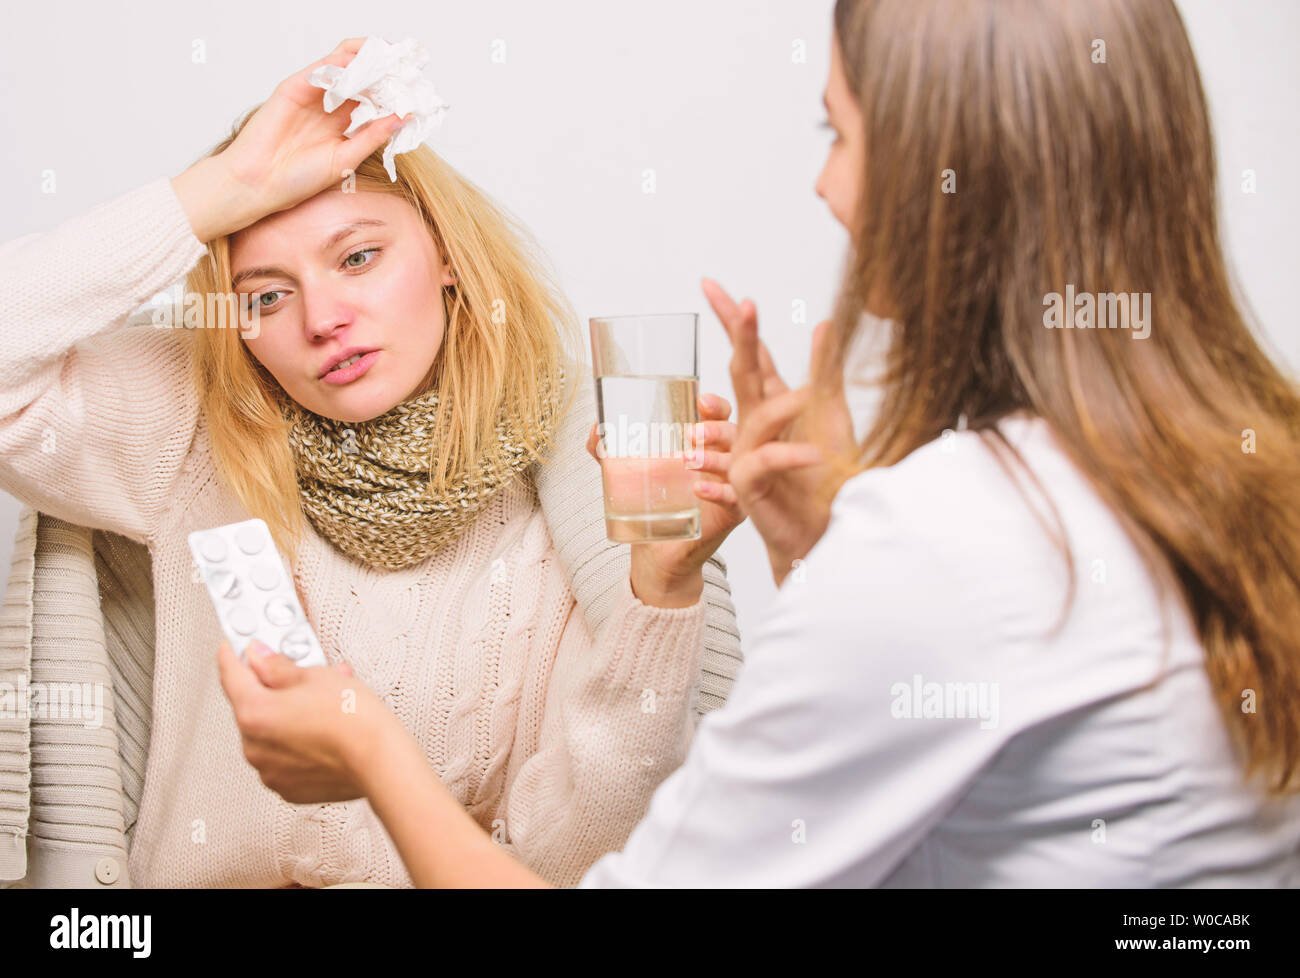 Tips how to get rid of cold. Recognize symptoms of cold. Remedies should help beat cold fast. Woman consult with doctor. Girl in scarf hold tissue while doctor offer treatment. Cold and flu remedies. Stock Photo